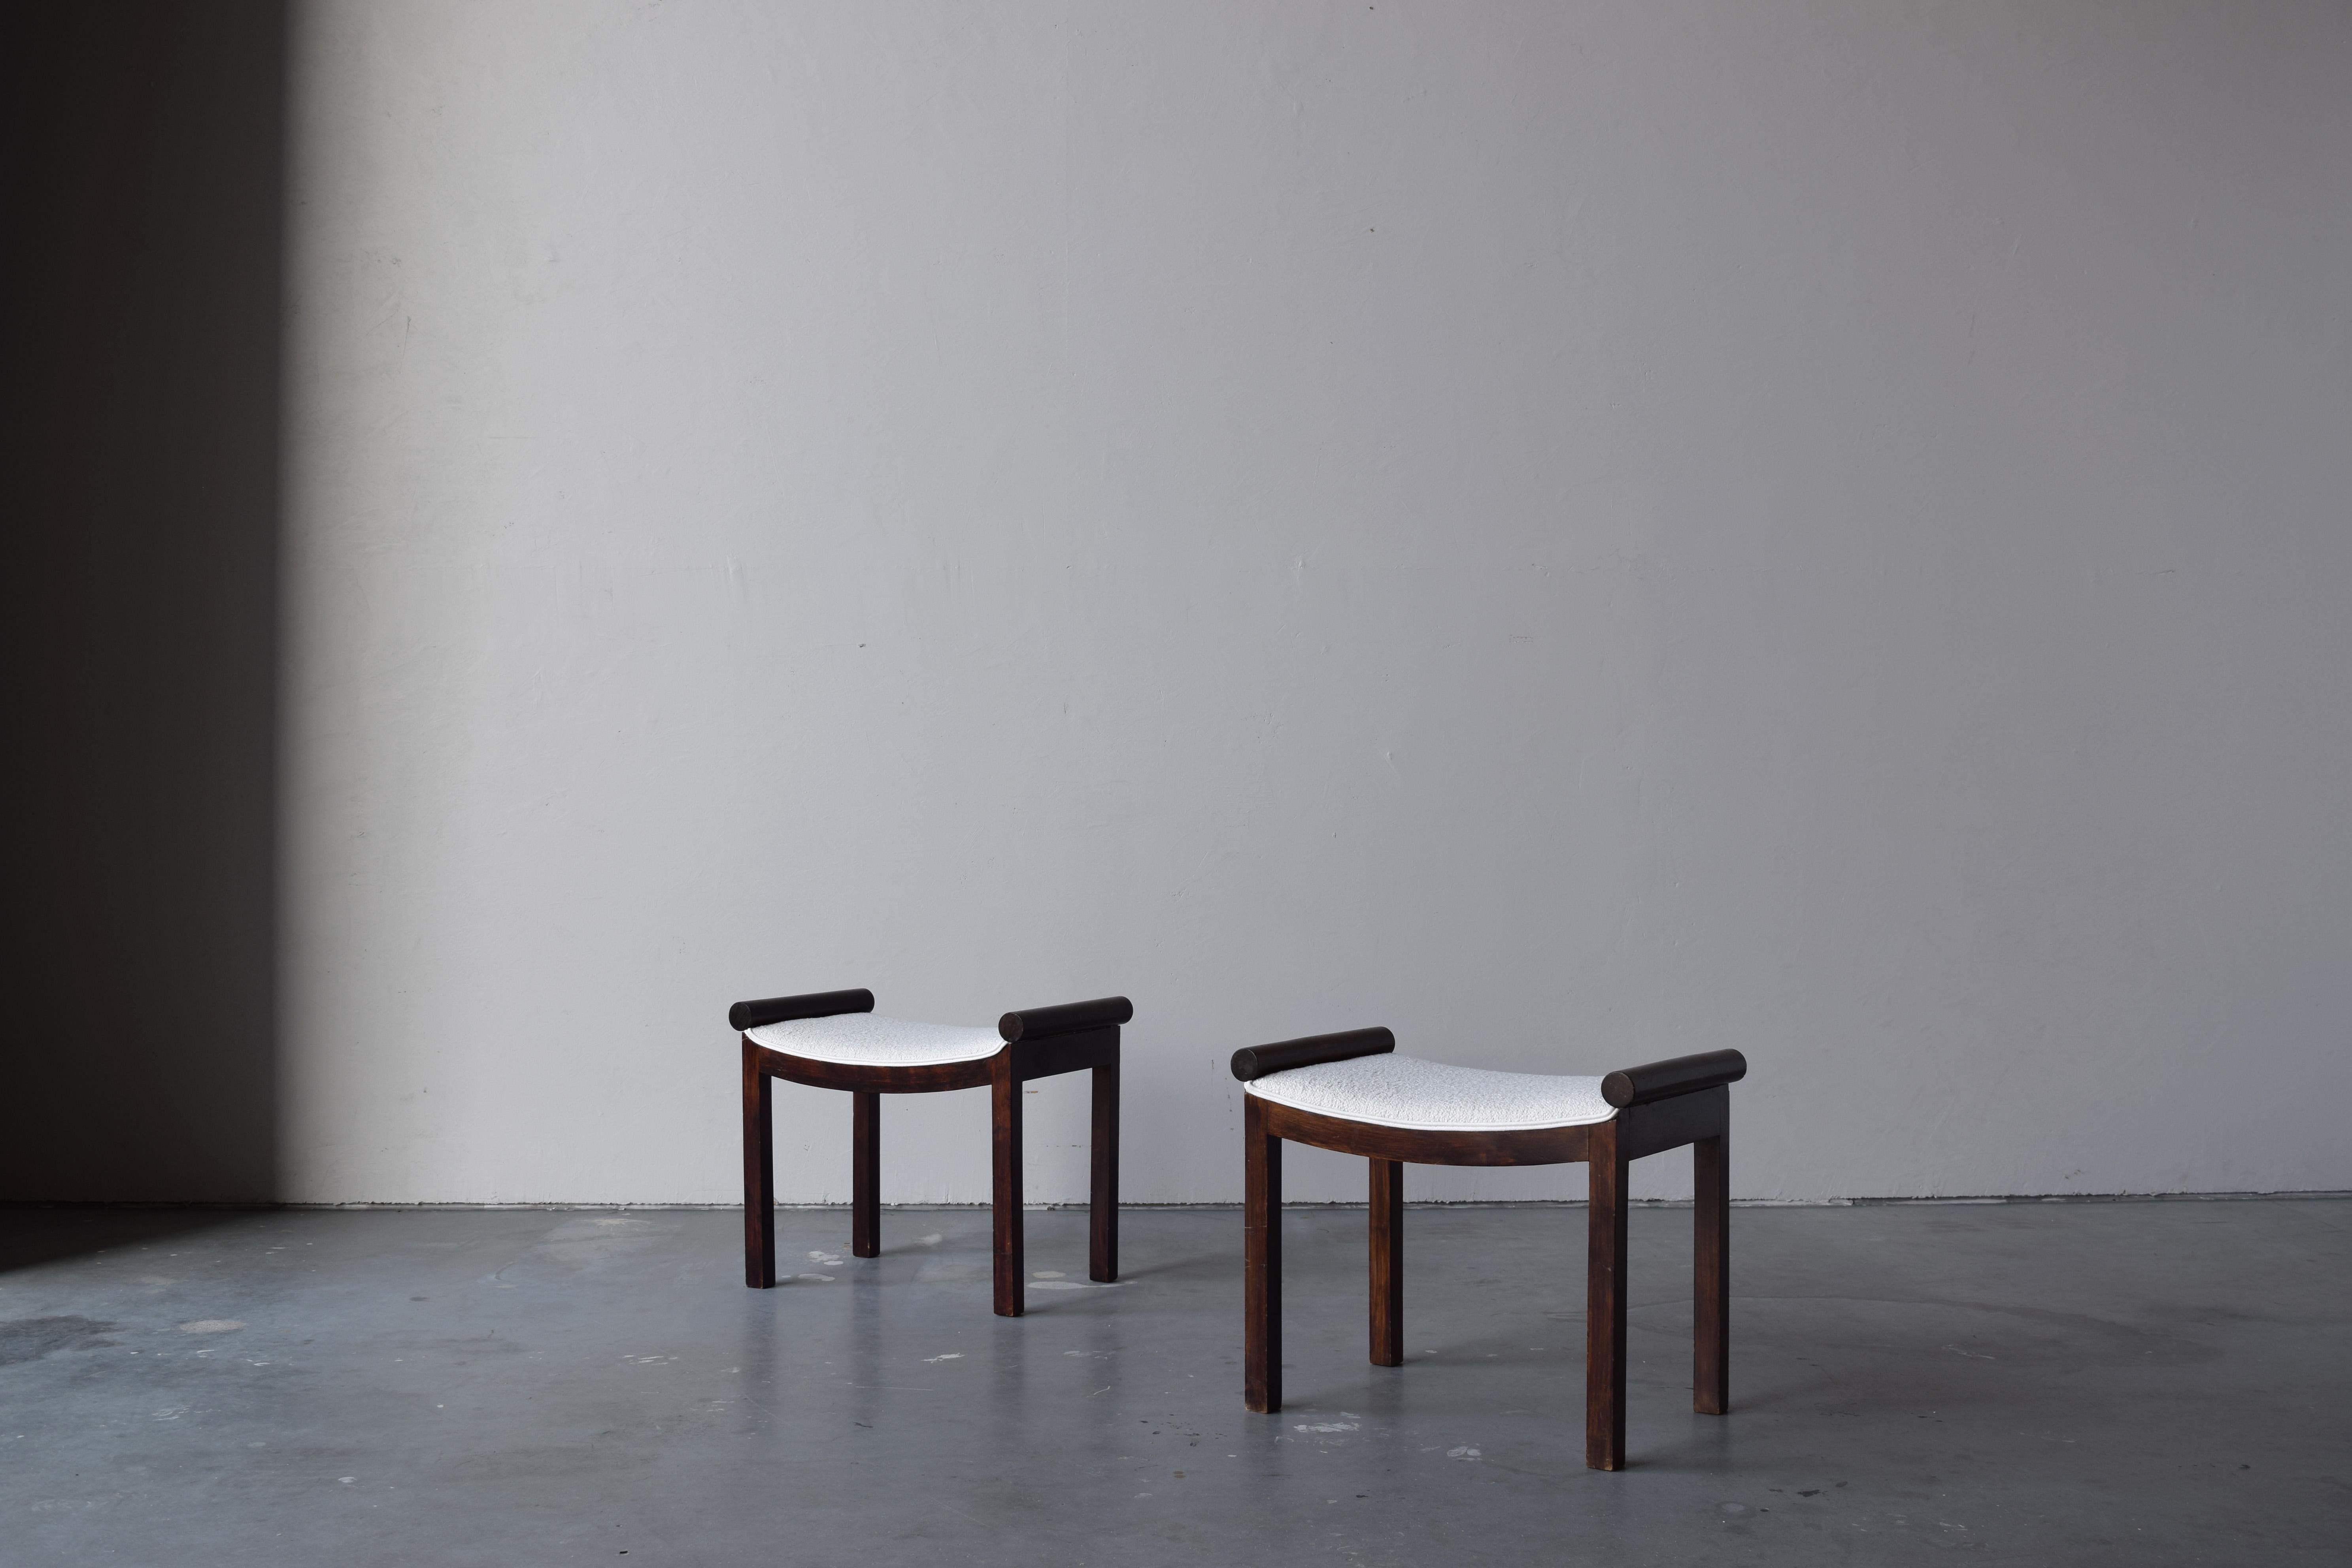 A pair of stools, designed and produced in Sweden, 1960s. In dark stained birch. Seats reupholstered in brand new white bouclé.

Other designers of the 20th century working in pine include Charlotte Perriand, Lisa-Johansson Pape, Pierre Chapo, and